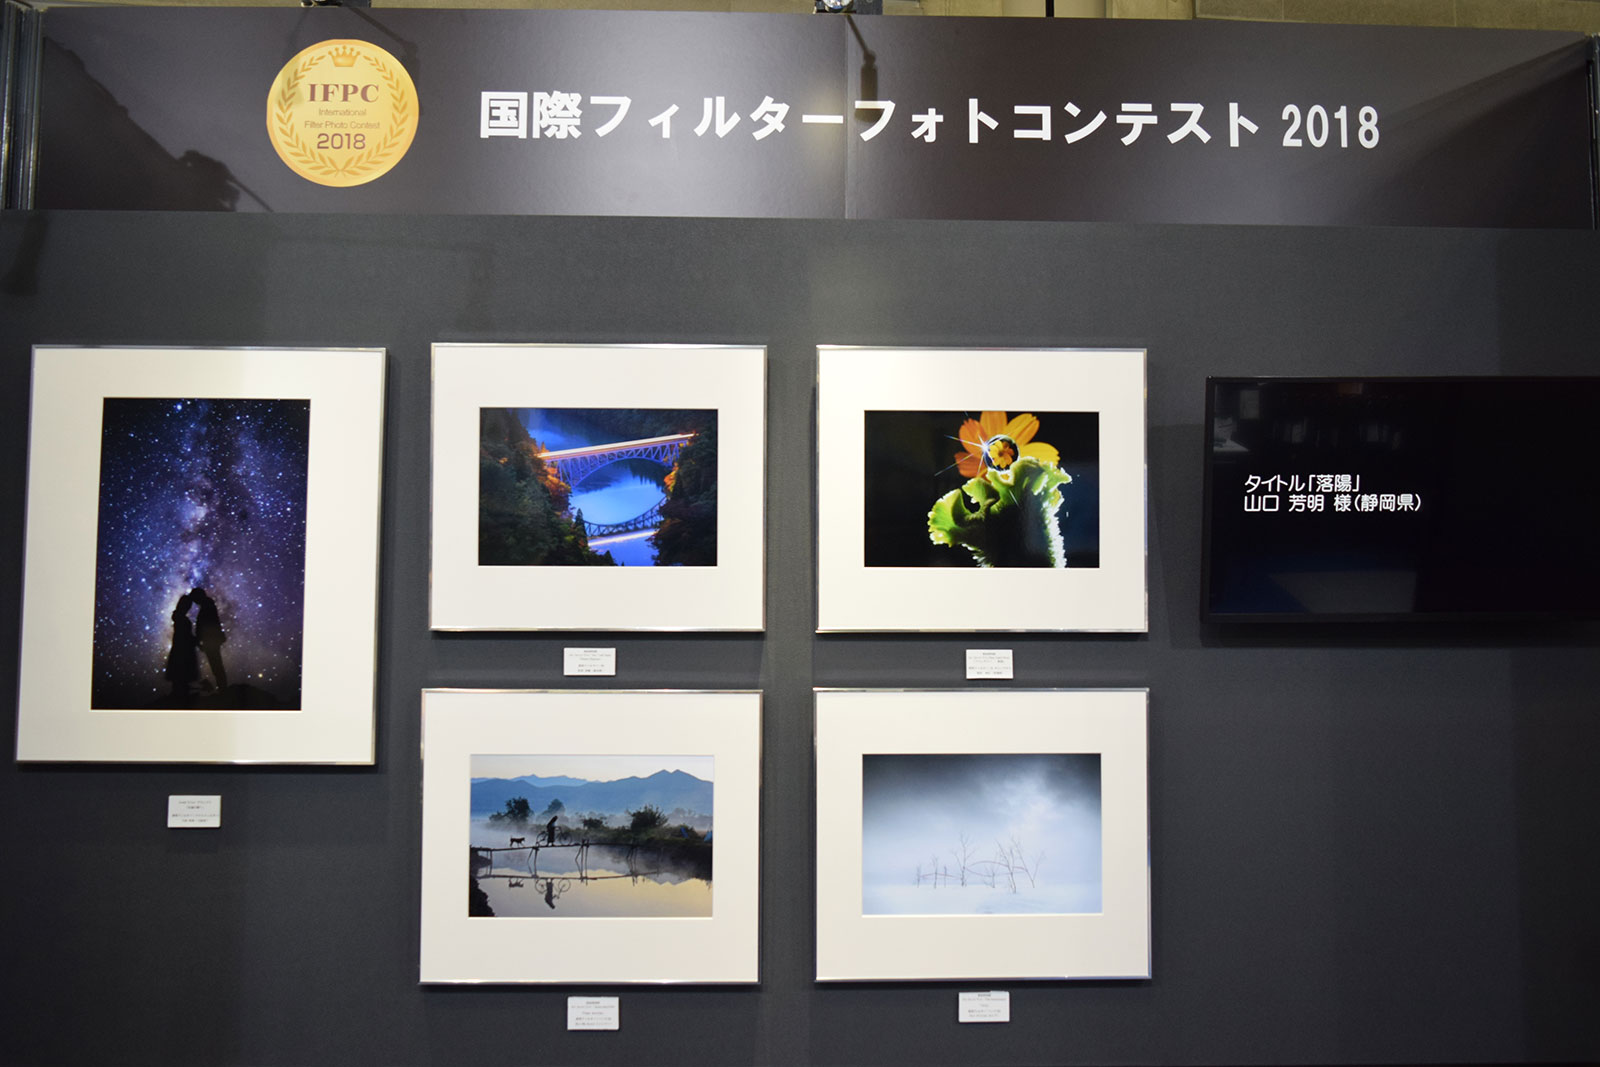 Last, but not least, the winner works of the International Filter Photo Contest (IFPC) 2018 were also exhibited in a dedicated corner.